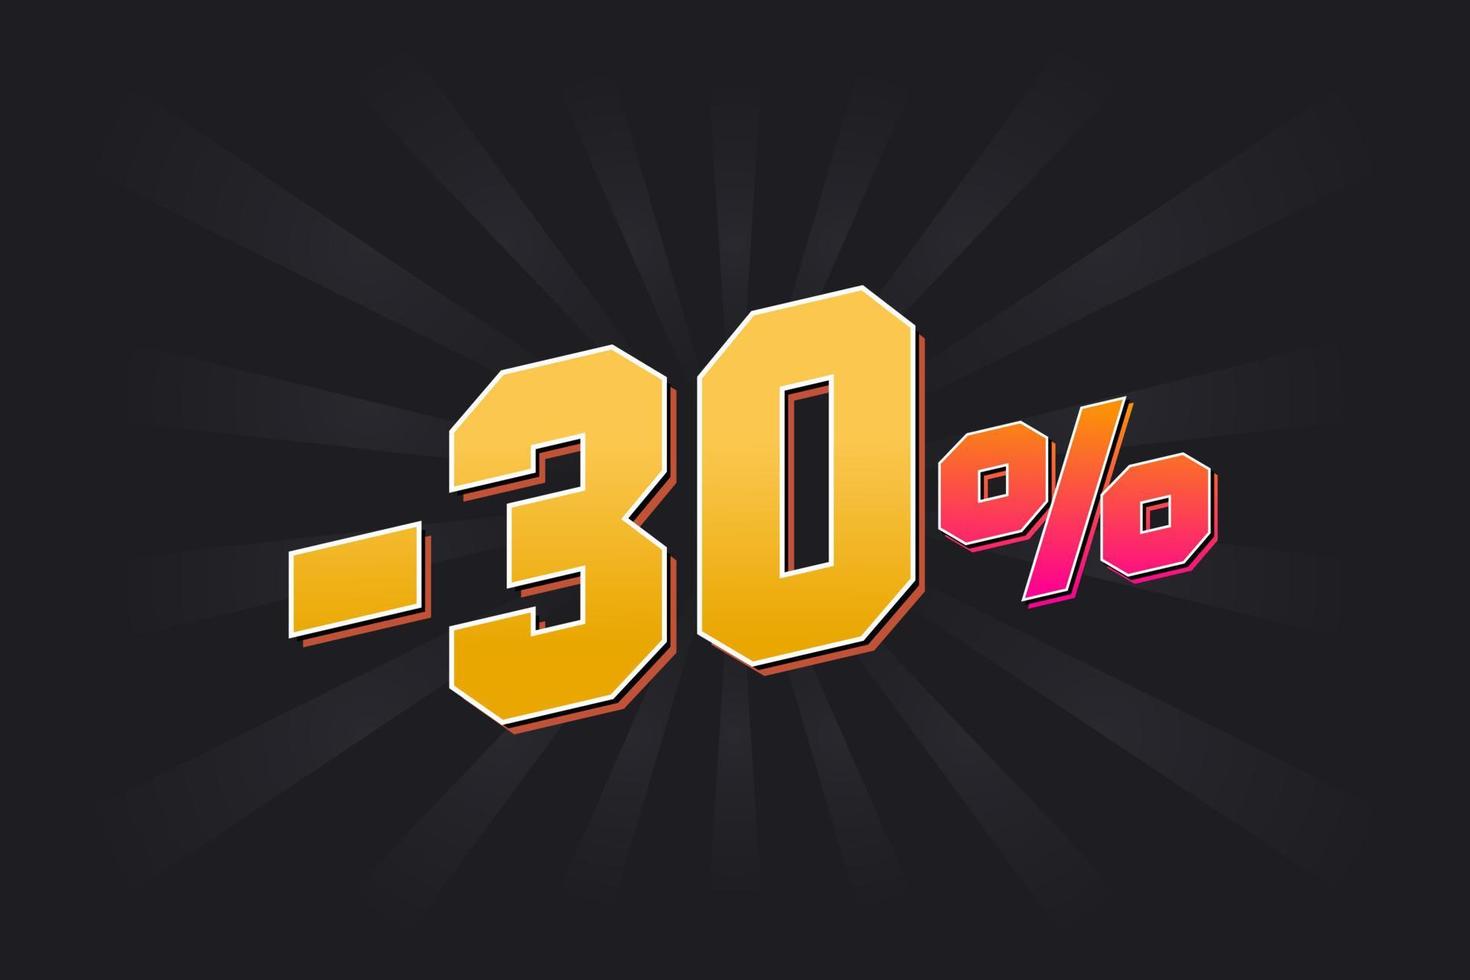 Negative 30 discount banner with dark background and yellow text. -30 percent sales promotional design. vector